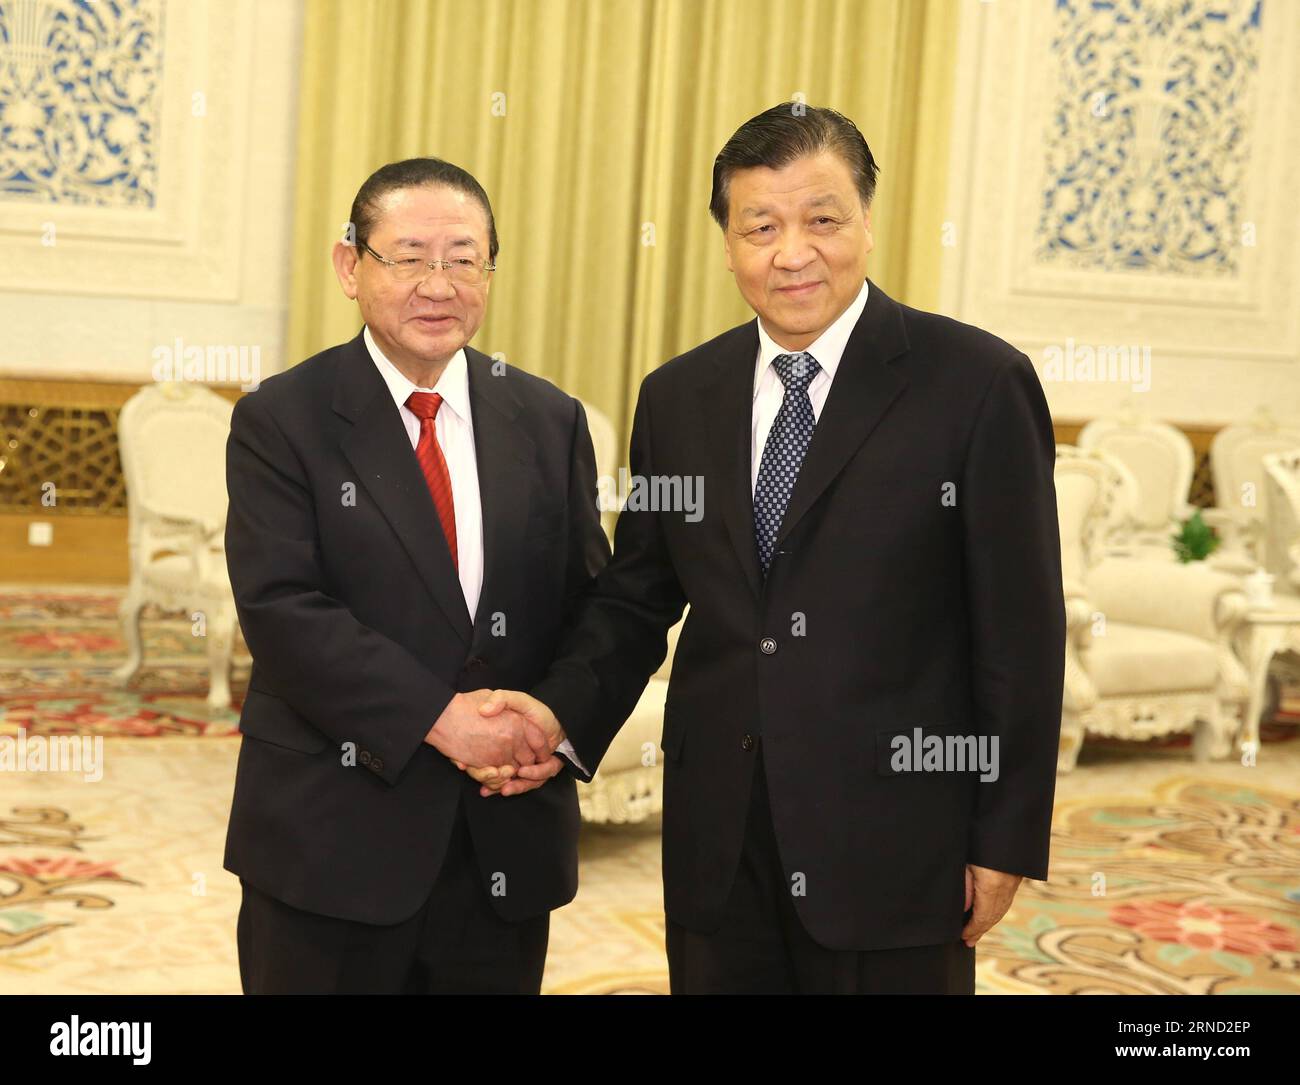 (160429) -- BEIJING, April 29, 2016 -- Liu Yunshan (R), a member of the Standing Committee of the Political Bureau of the Communist Party of China (CPC) Central Committee, meets with a Japanese delegation led by Taku Yamasaki, former secretary-general of Japan s Liberal Democratic Party, in Beijing, capital of China, April 29, 2016. ) (mp) CHINA-BEIJING-LIU YUNSHAN-JAPANESE DELEGATION-MEETING (CN) MaxZhancheng PUBLICATIONxNOTxINxCHN   160429 Beijing April 29 2016 Liu Yunshan r a member of The thing Committee of The Political Bureau of The Communist Party of China CPC Central Committee Meets Wi Stock Photo